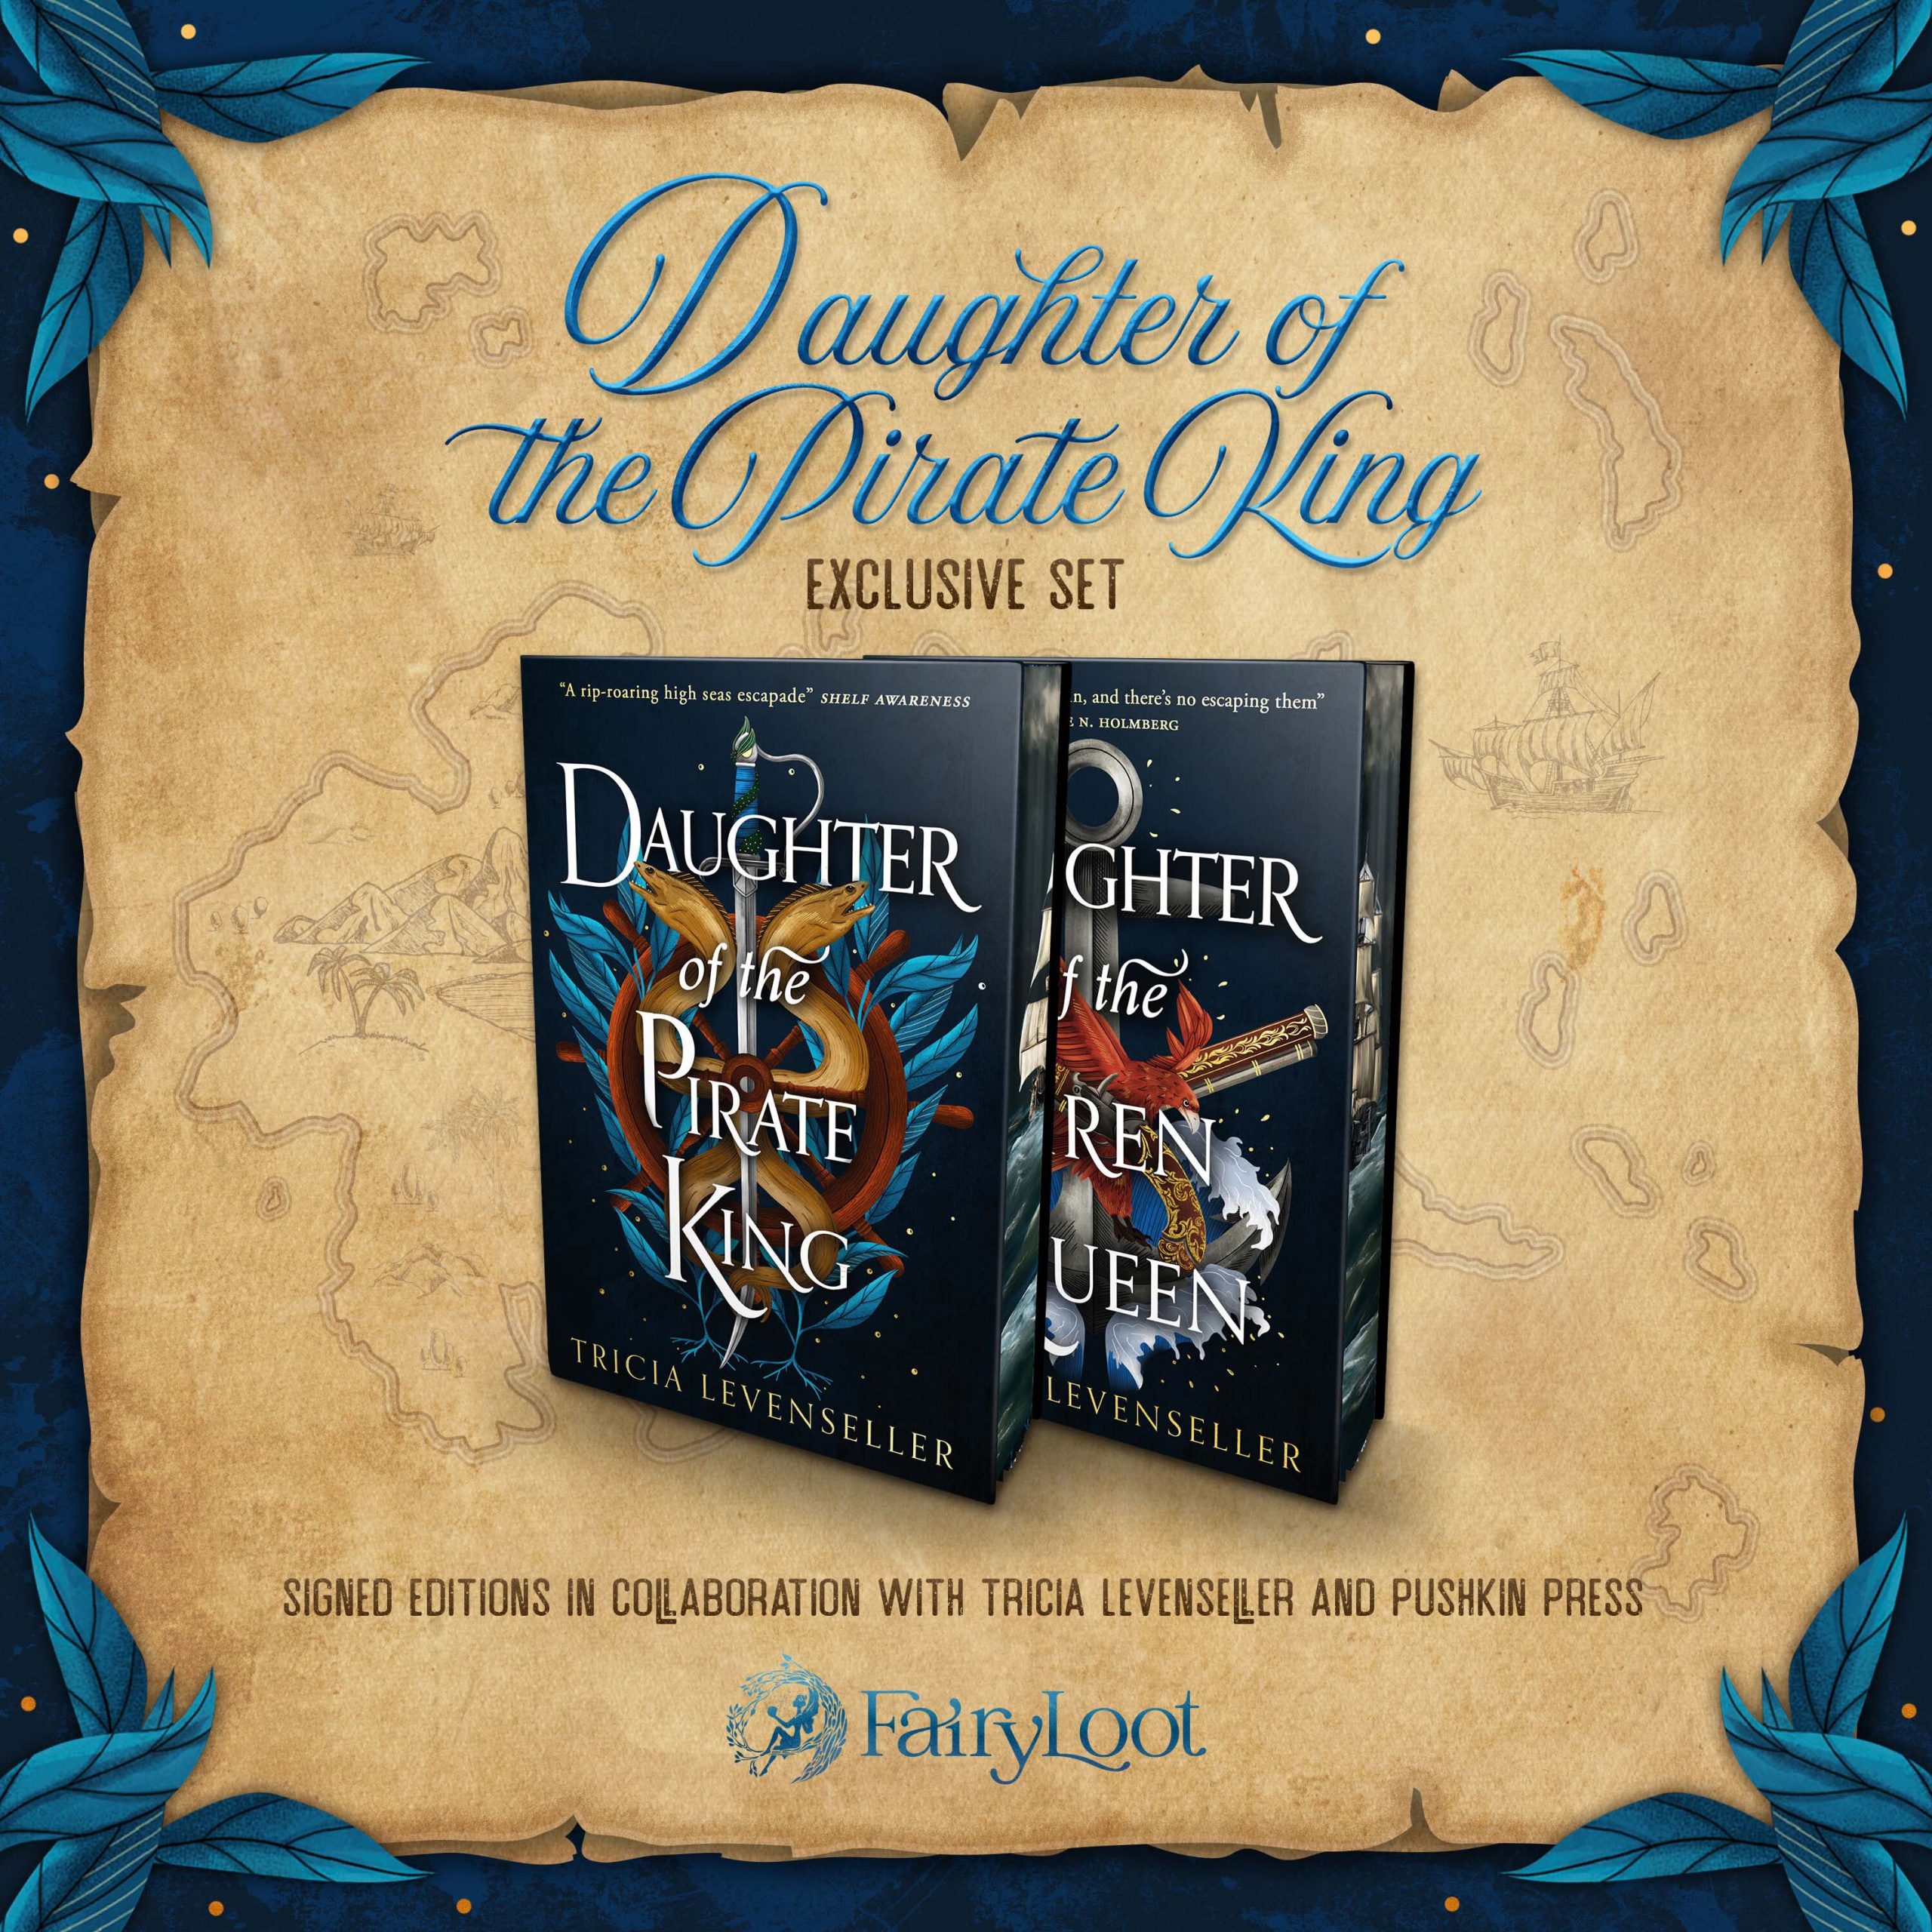 Daughter of The Pirate King Exclusive Set